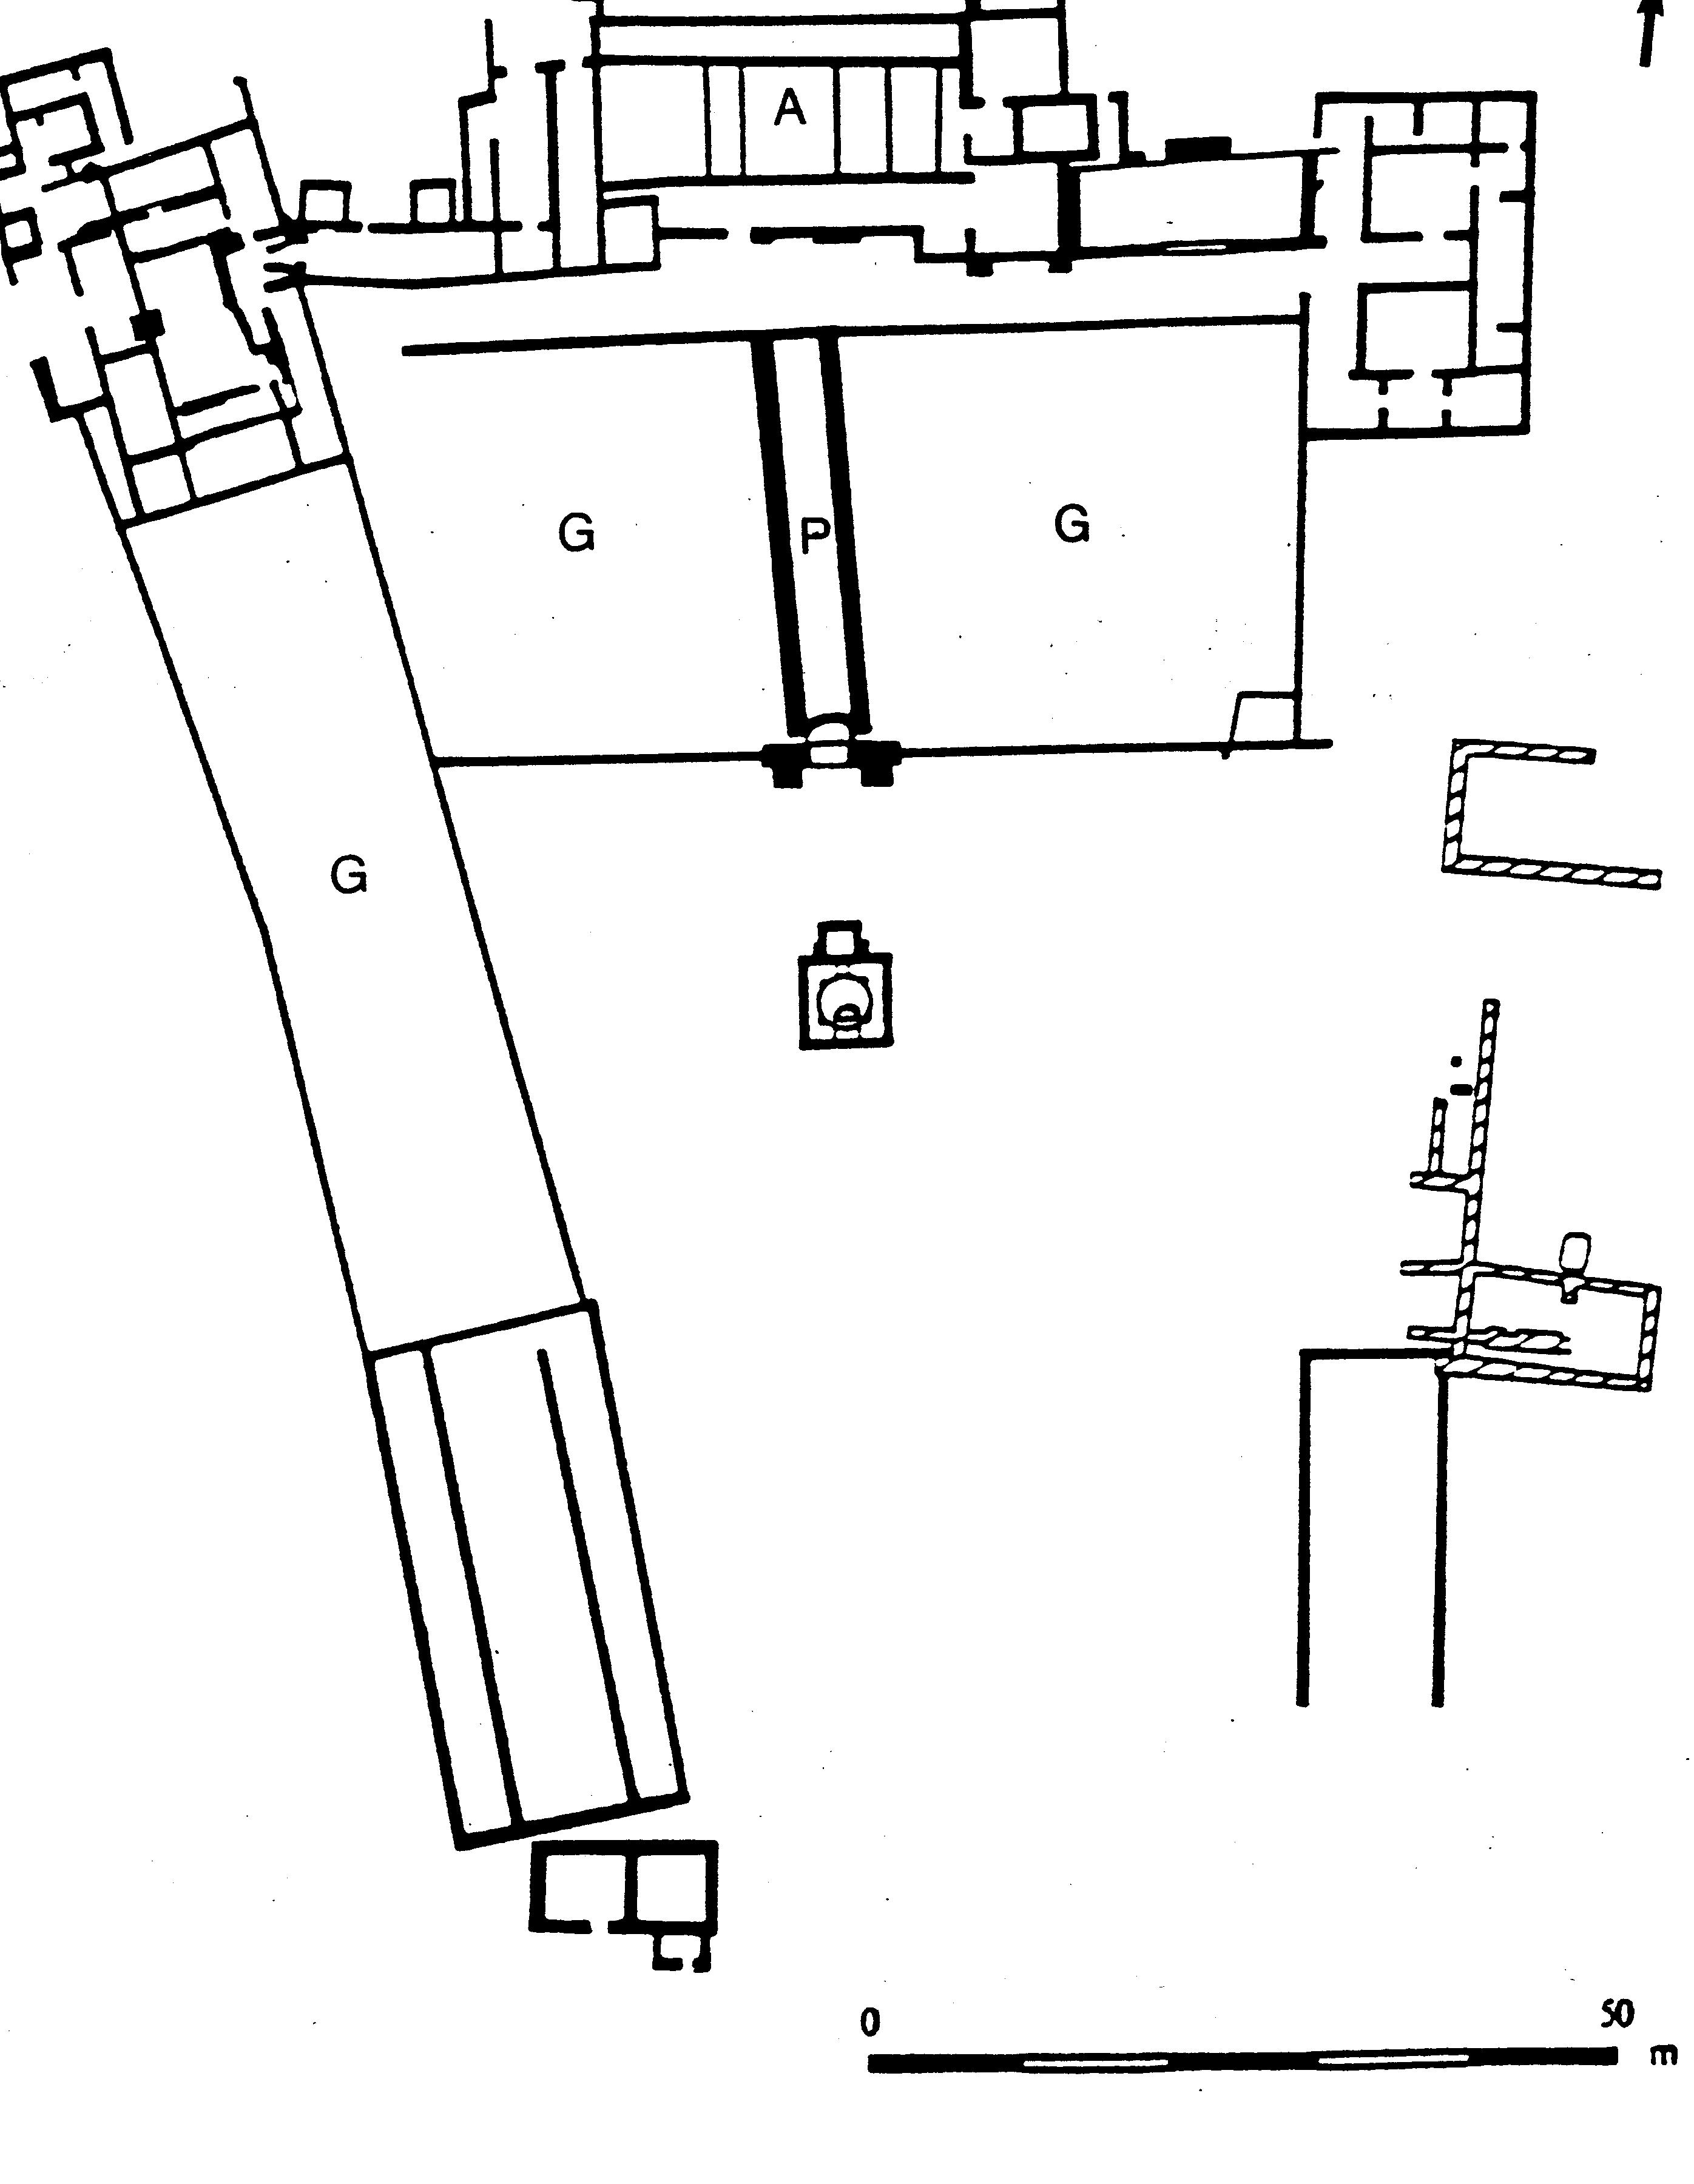 Fig. 1: Plan of the villa with the main house (A), garden areas (G), and a large pool (P). Adapted from Detsicas 1983, fig. 20